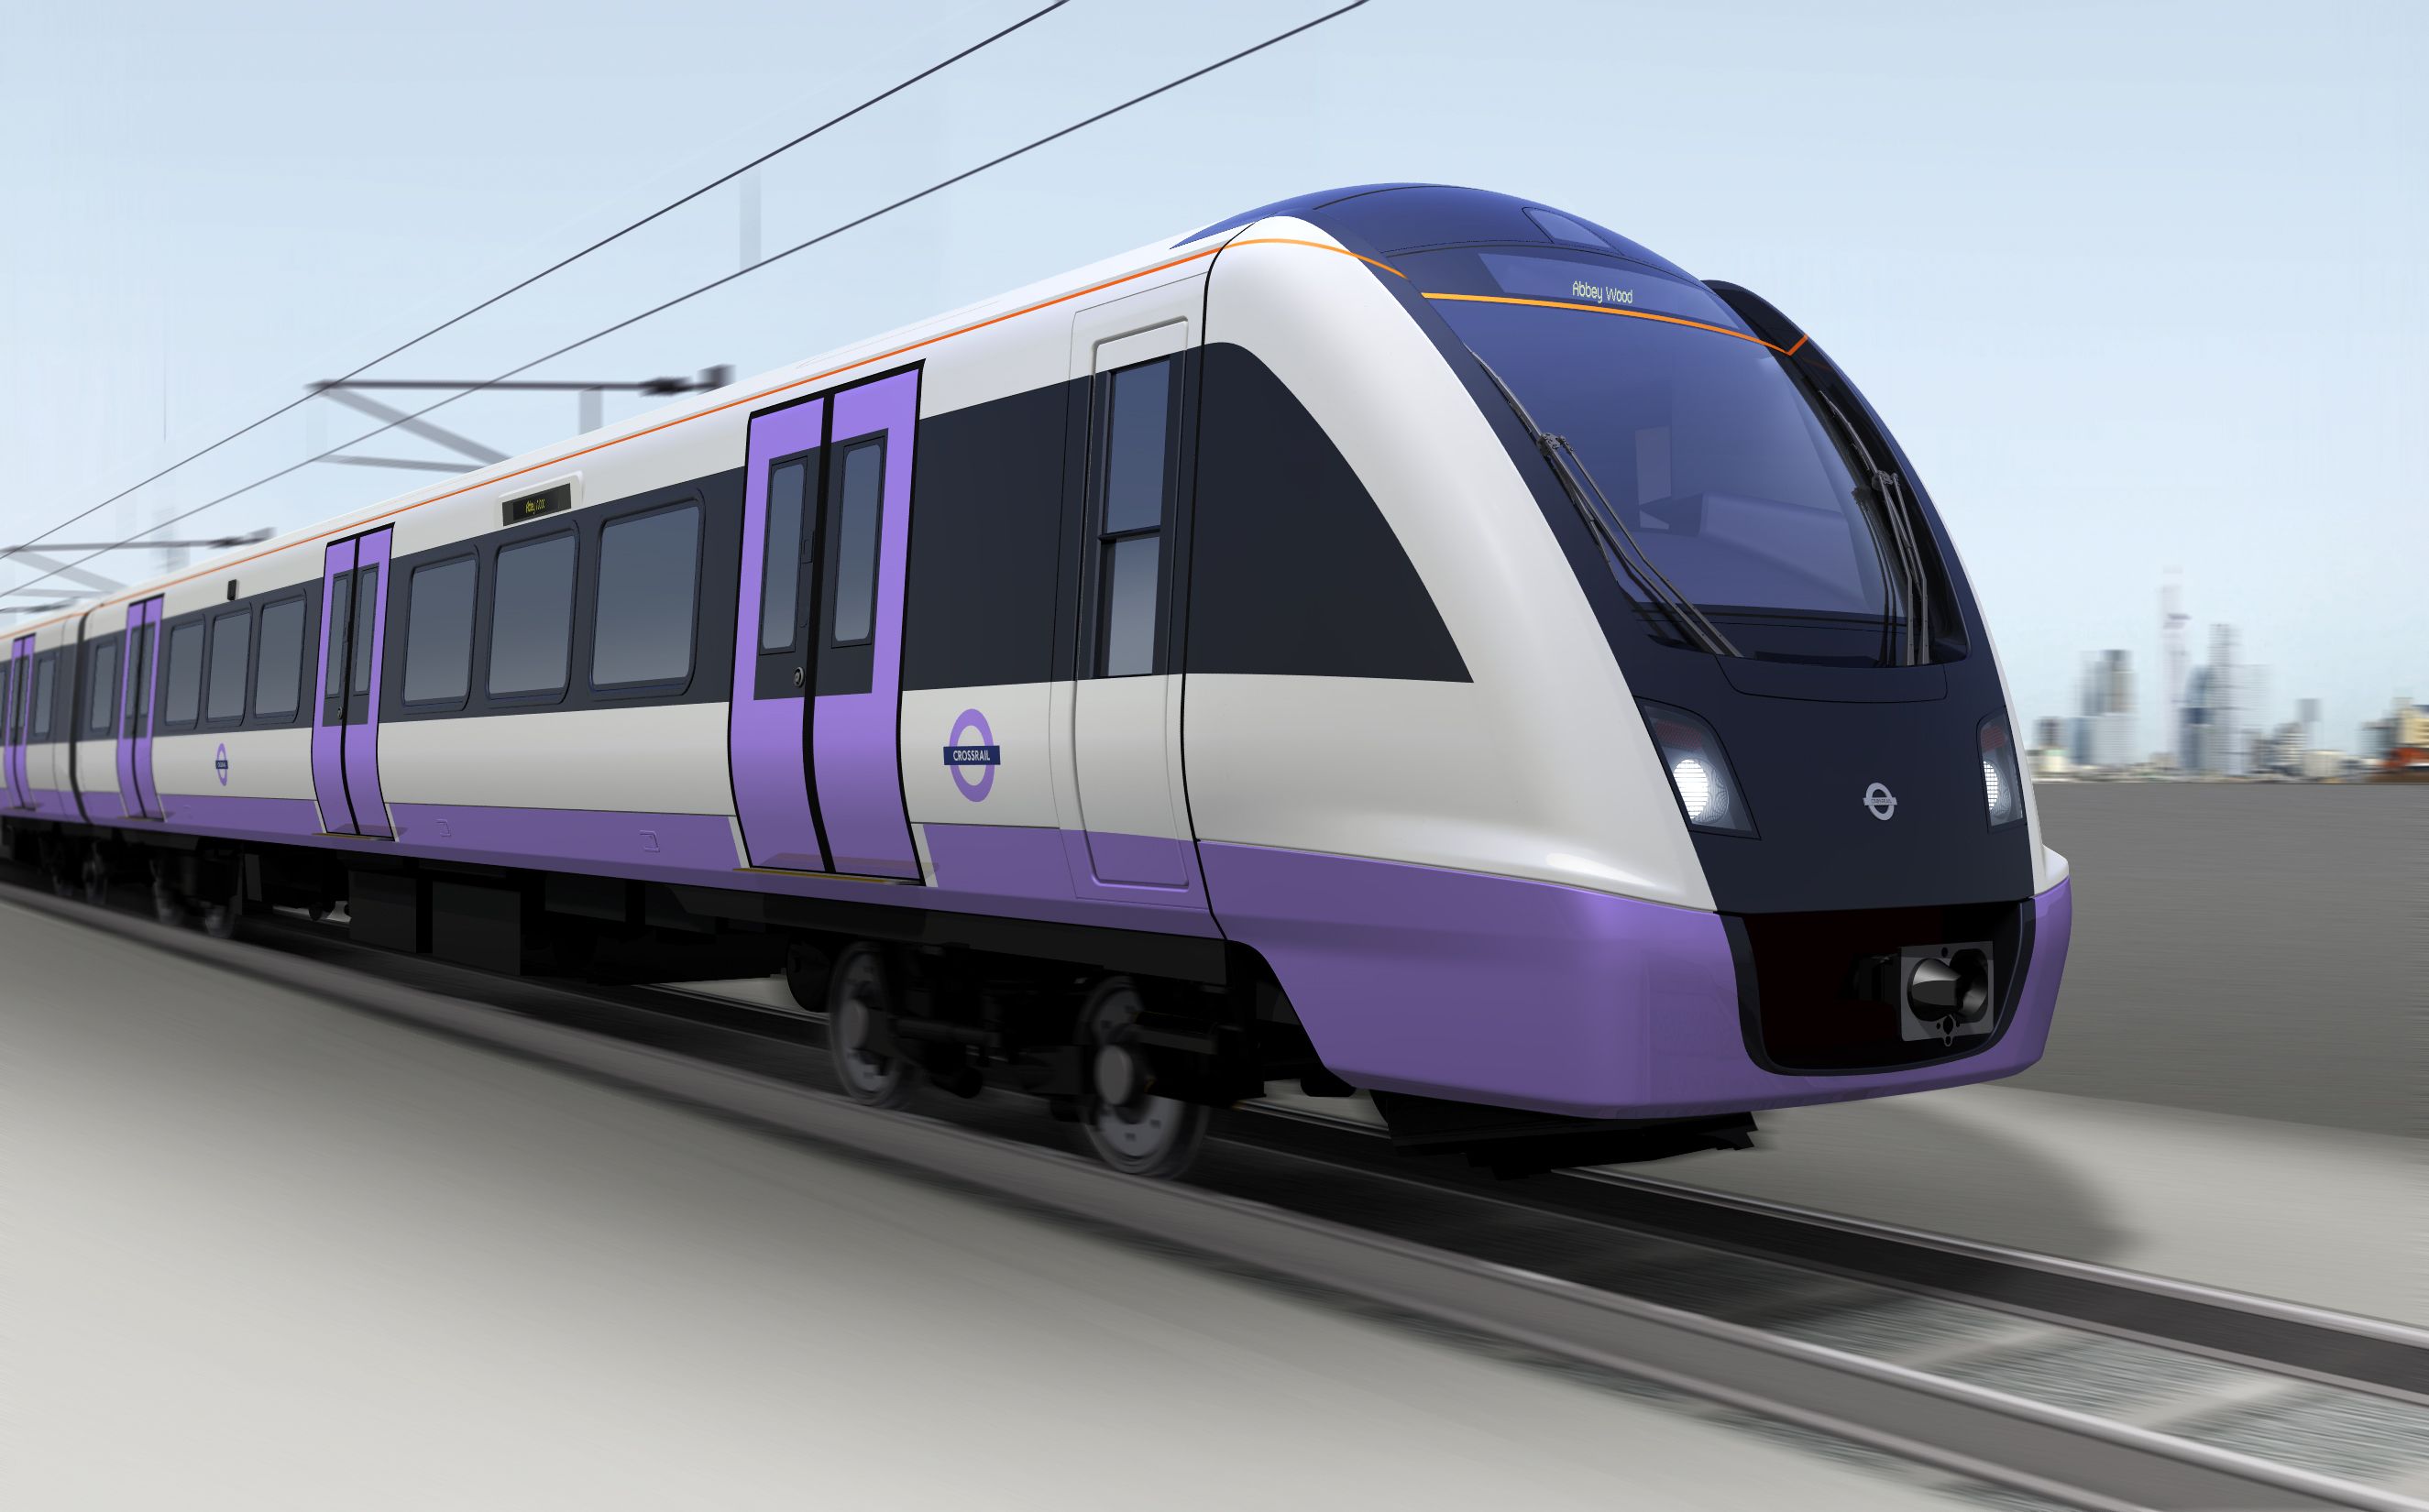 london s crossrail trains will have wi fi and 4g for internet connection for all image 1